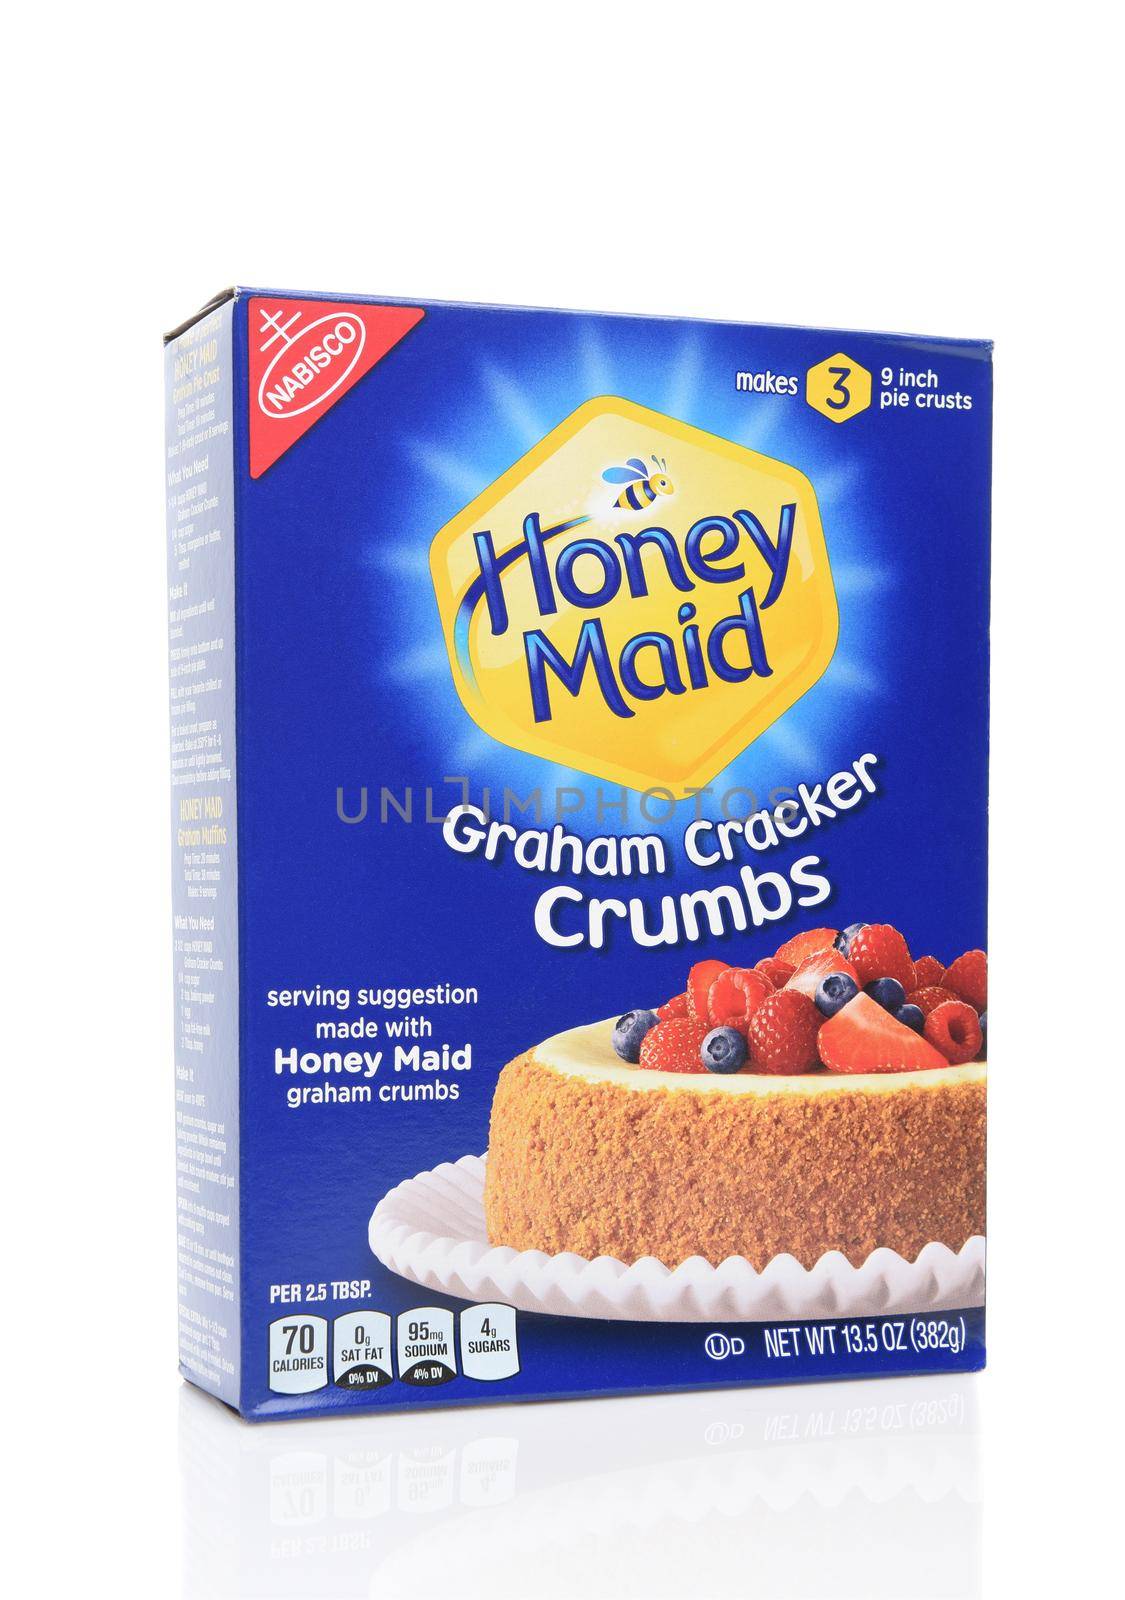 IRVINE, CALIFORNIA - AUGUST 14, 2019: A box of Honey Maid Graham Cracker Crumbs, from Nabisco. by sCukrov